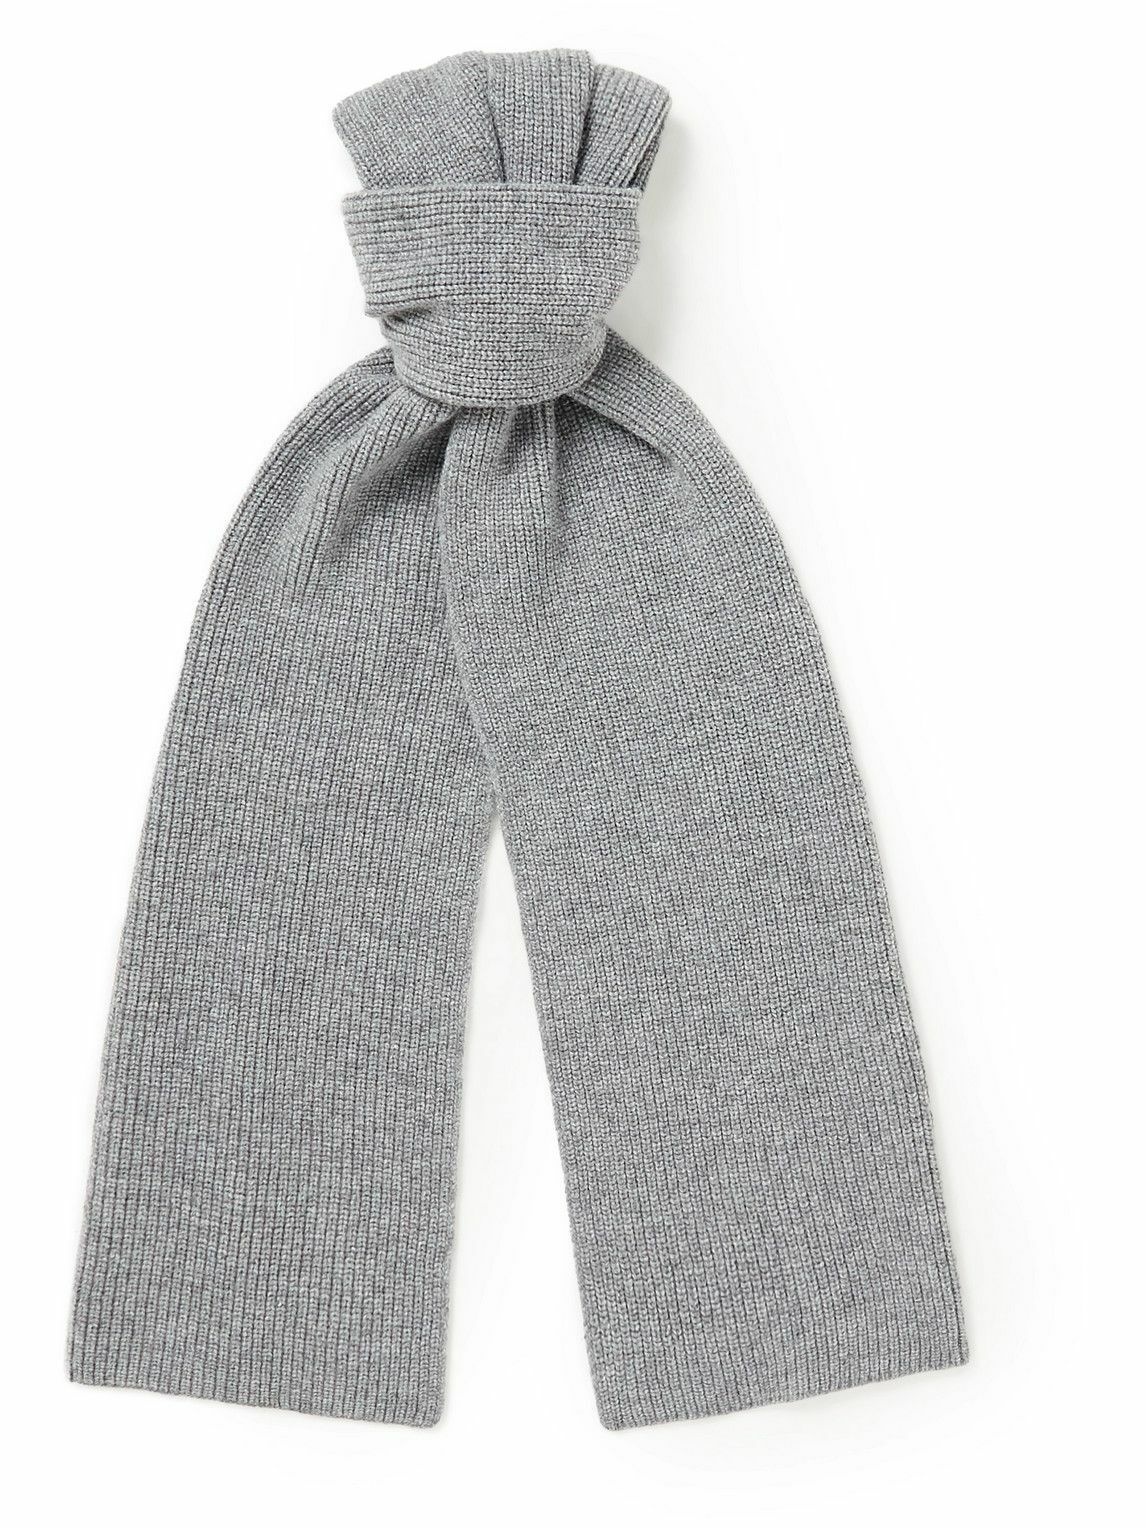 Mr P. - Ribbed Cashmere Scarf Mr P.